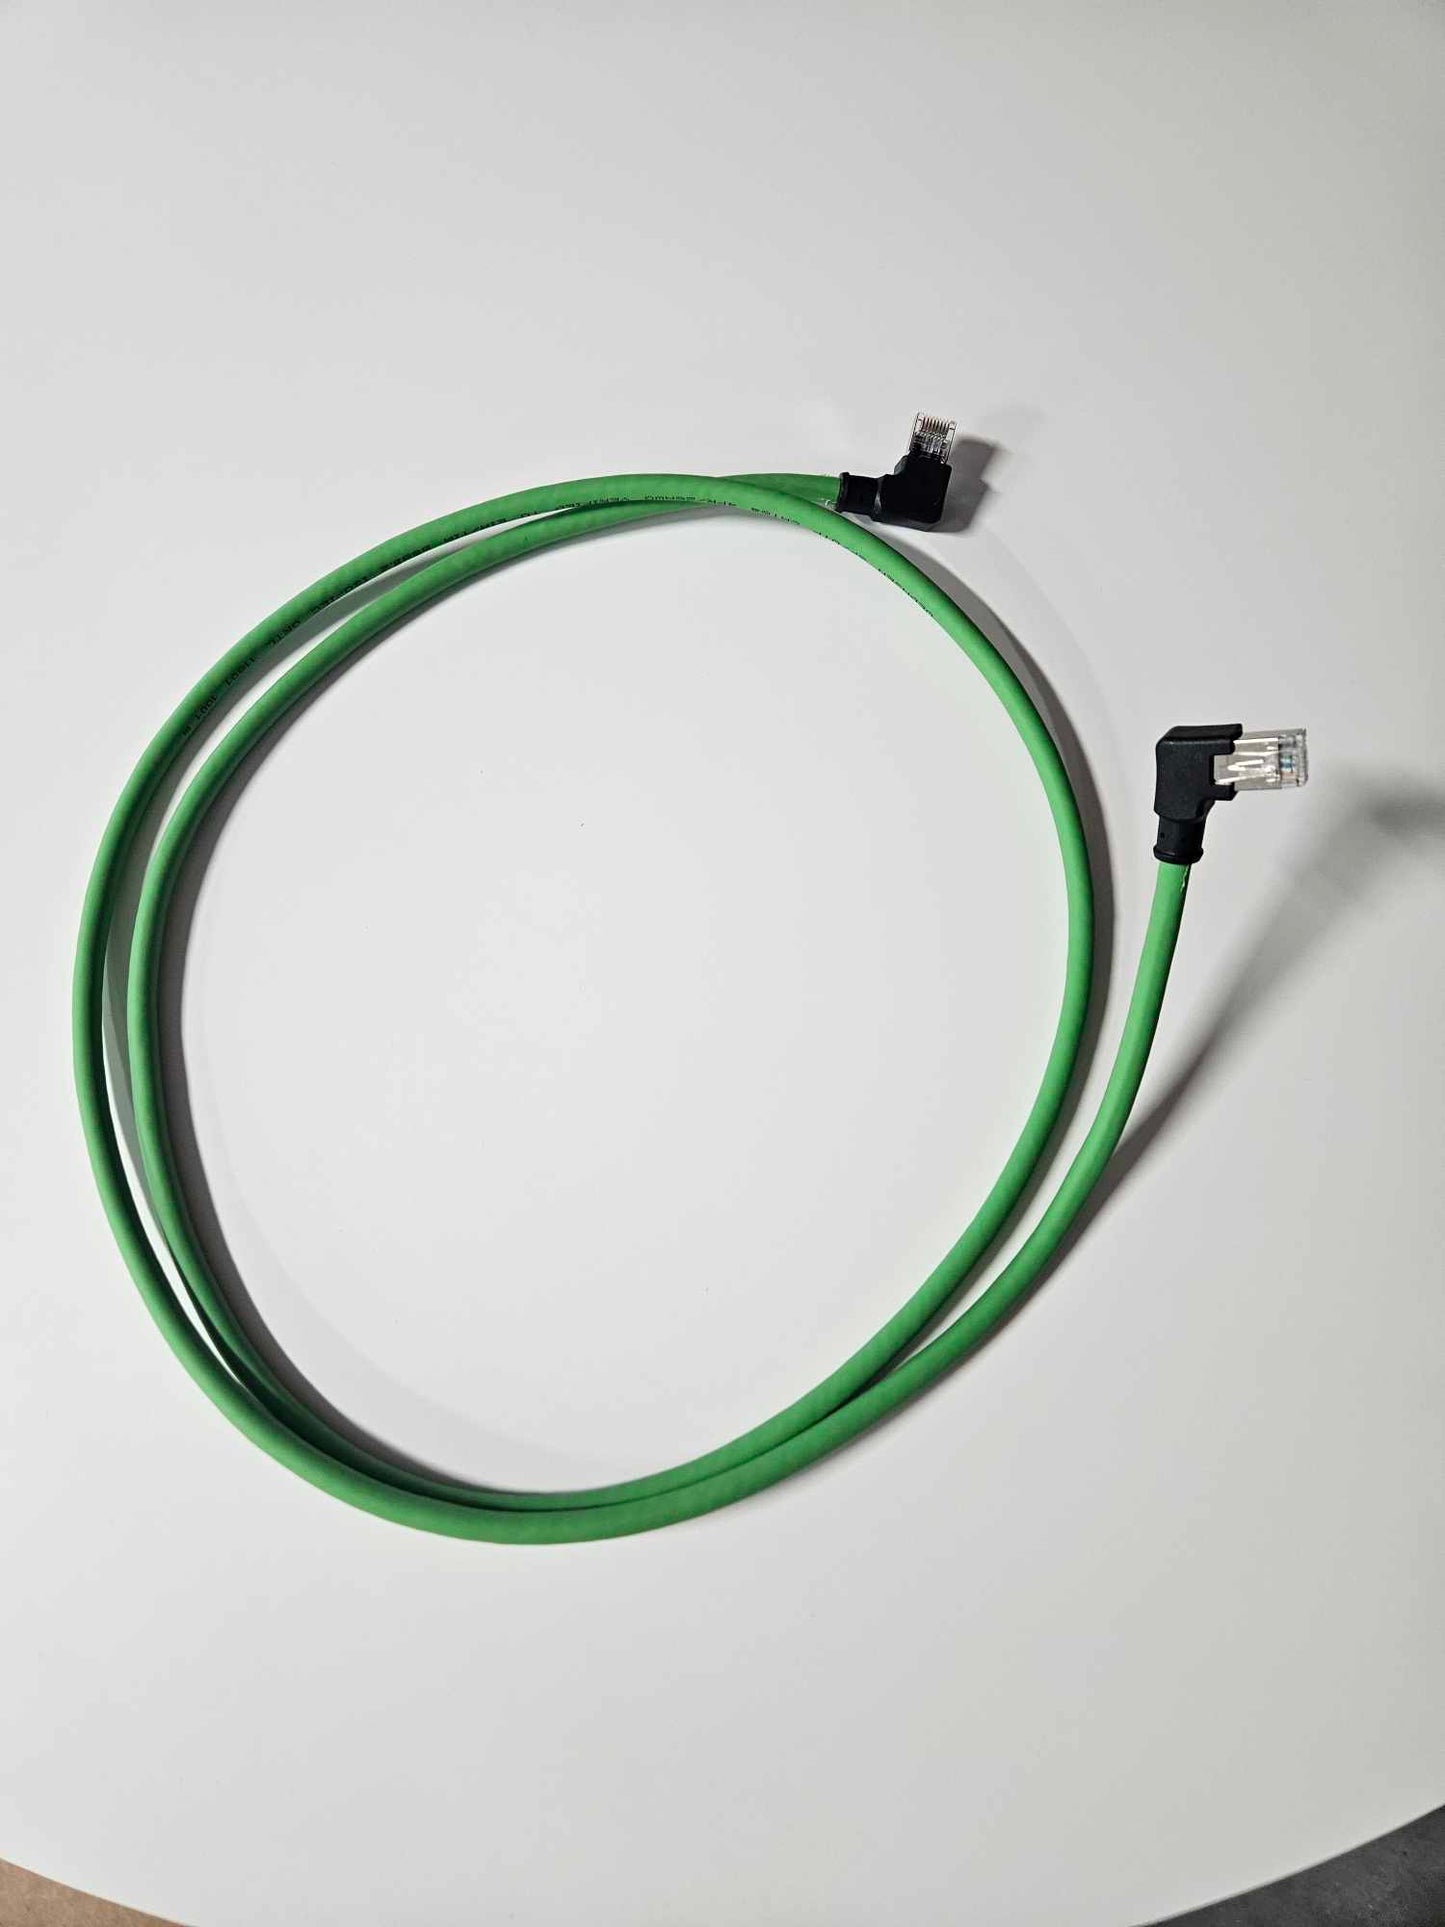 Hoson N10 Logistics cable to connect mainboard to headboard